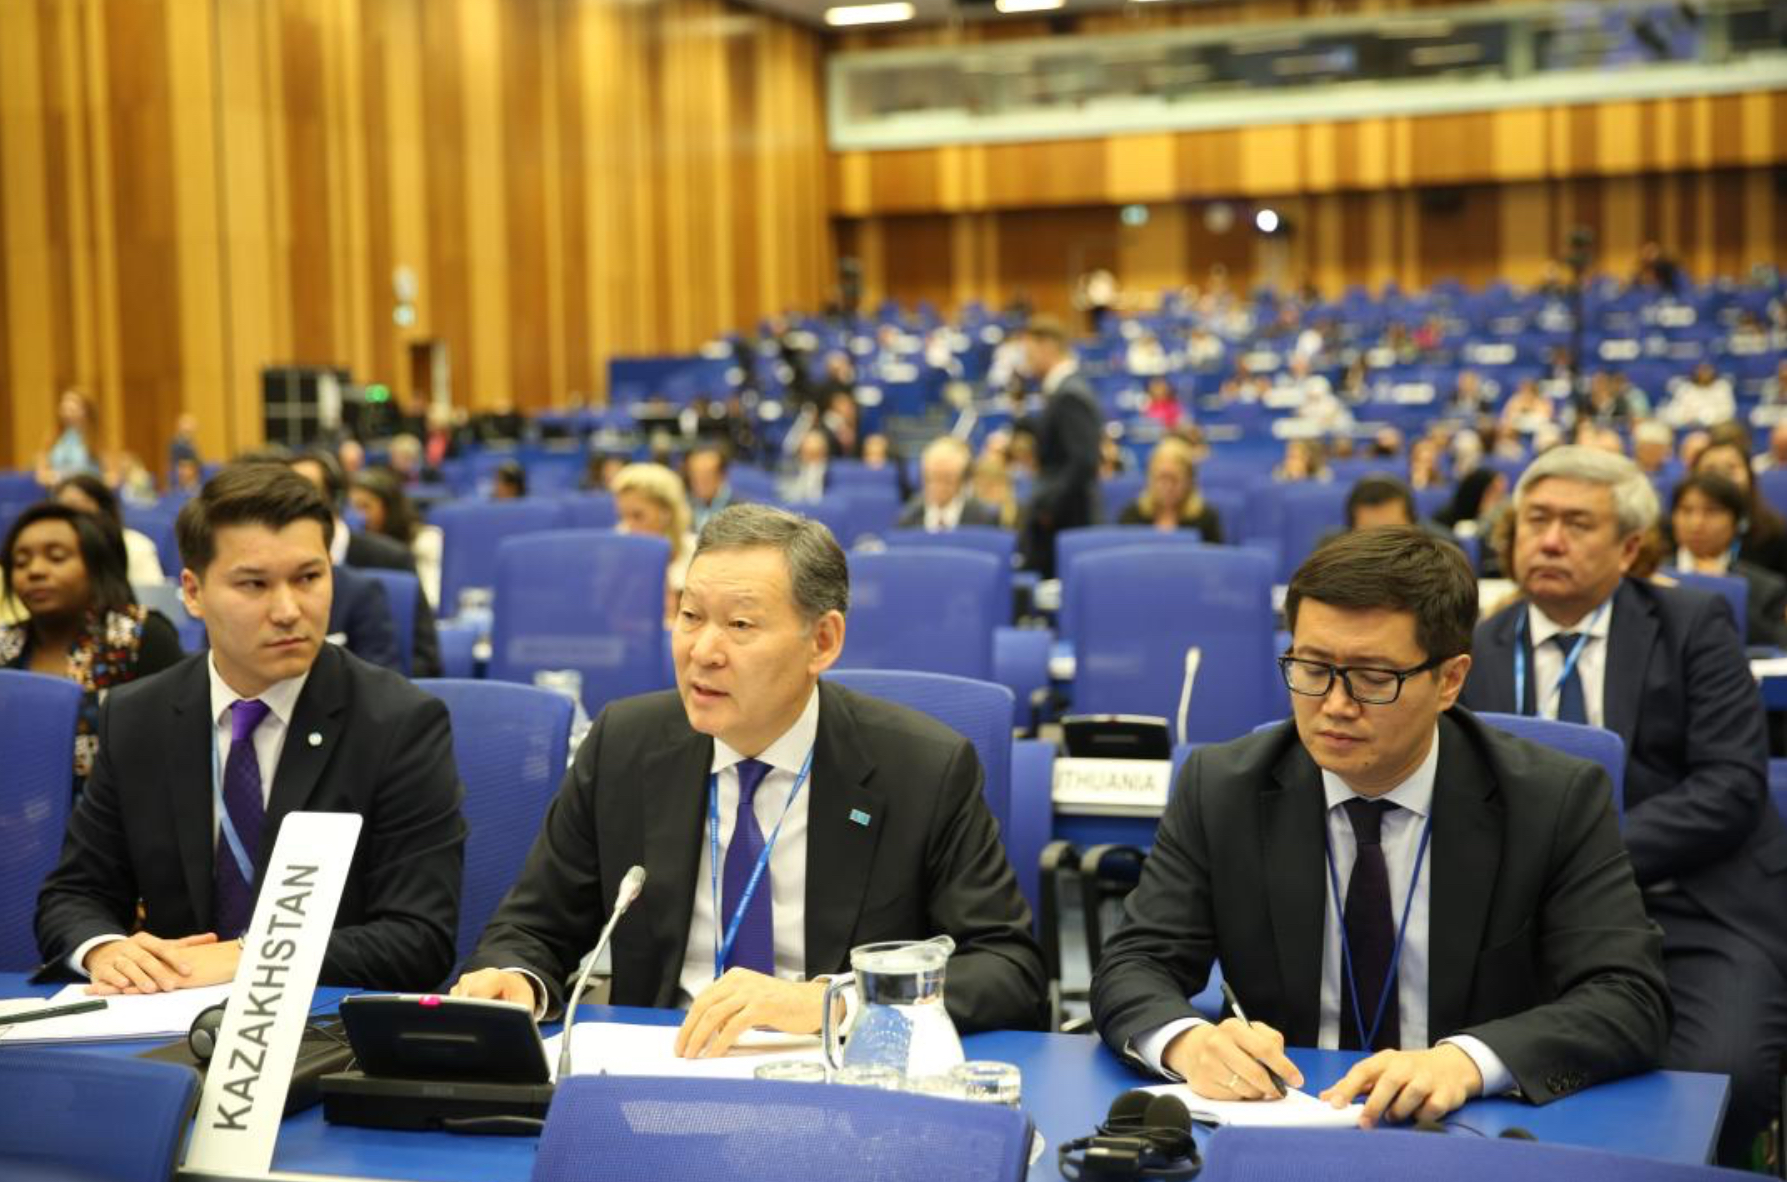 Kazakhstan's resolution promotes sovereign equality in IAEA: new era for fairness and democracy  